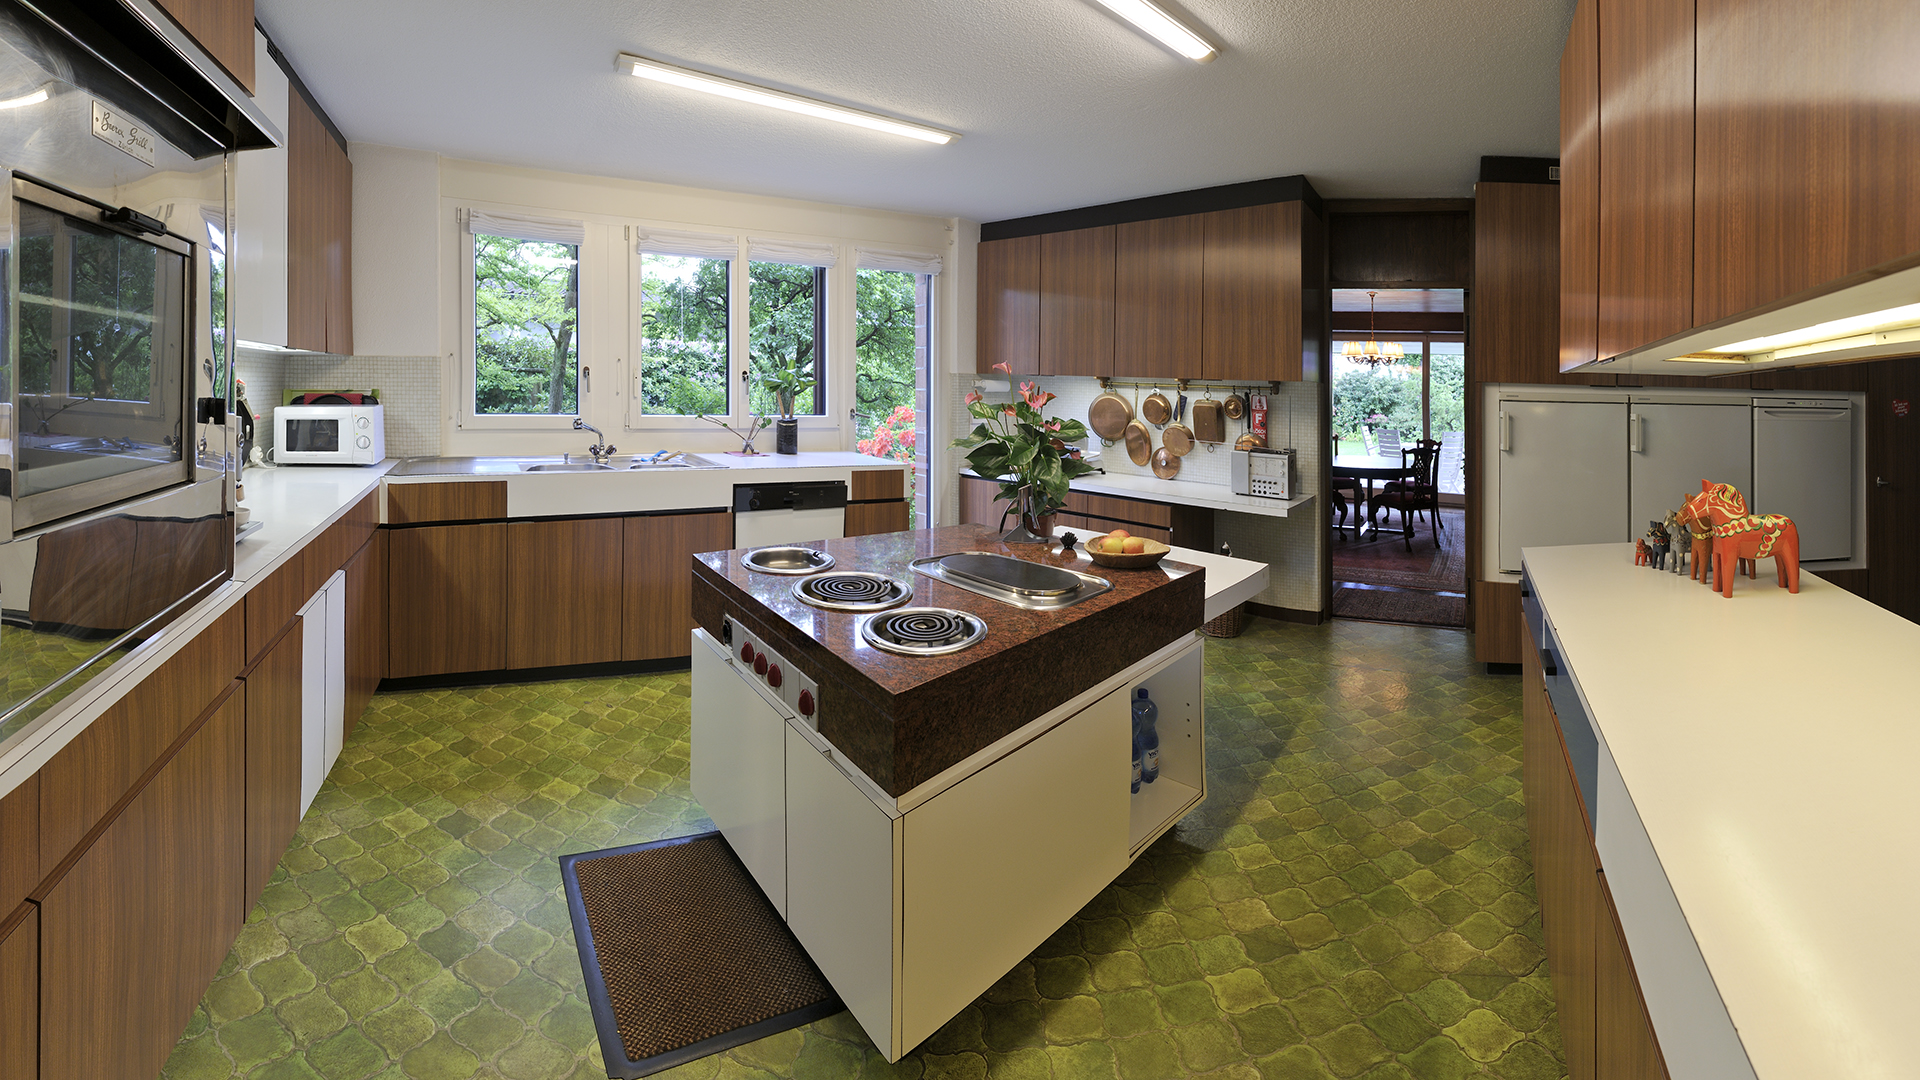 Kitchen with cooking island - great garden view and entrance